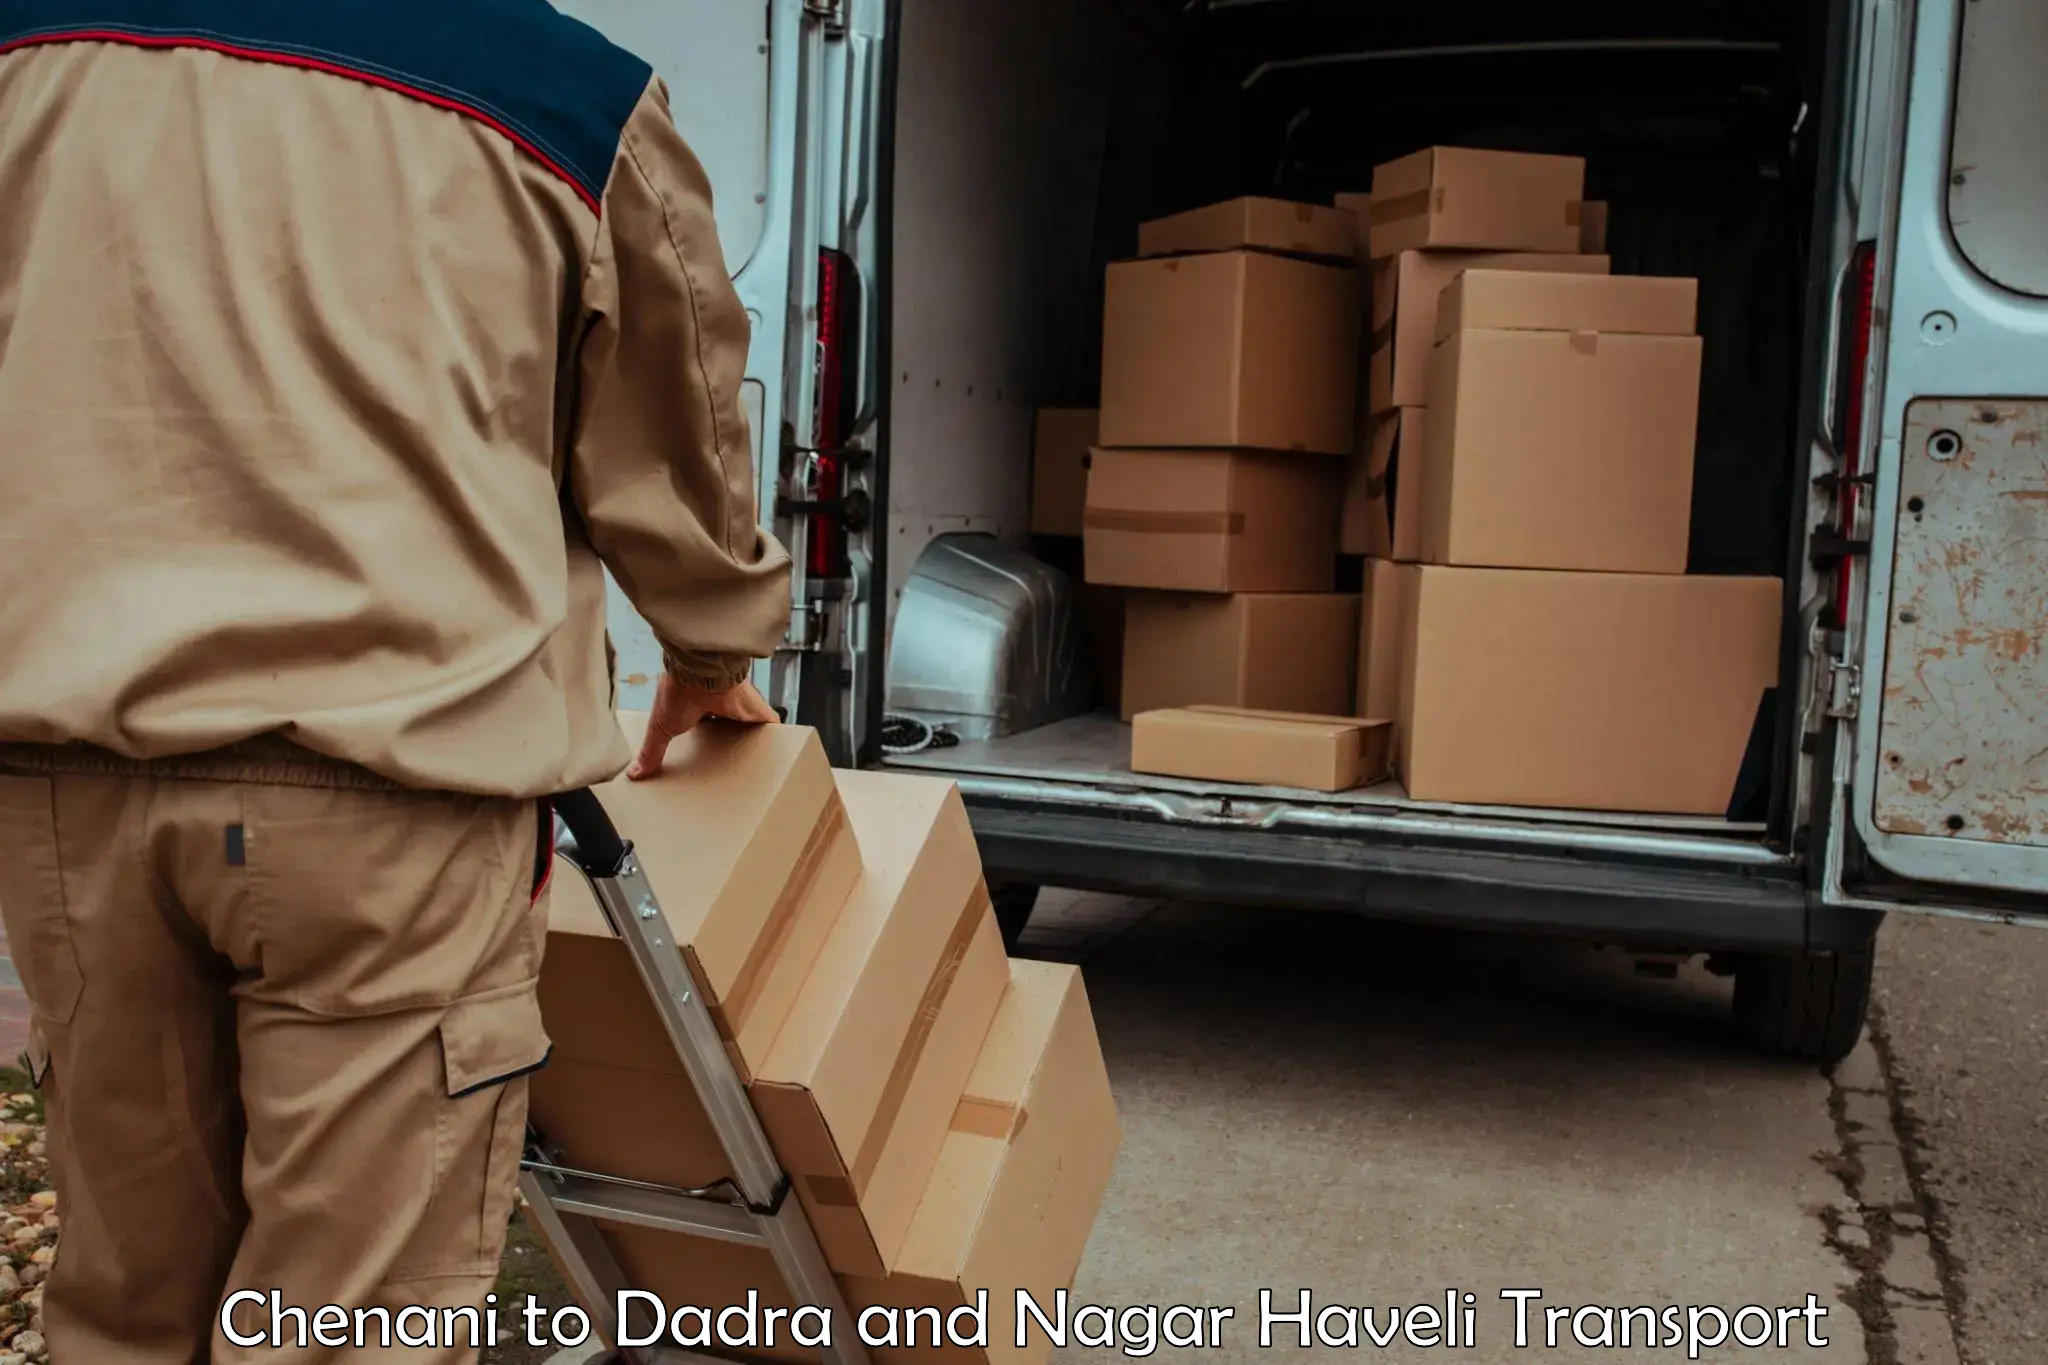 Air freight transport services Chenani to Dadra and Nagar Haveli